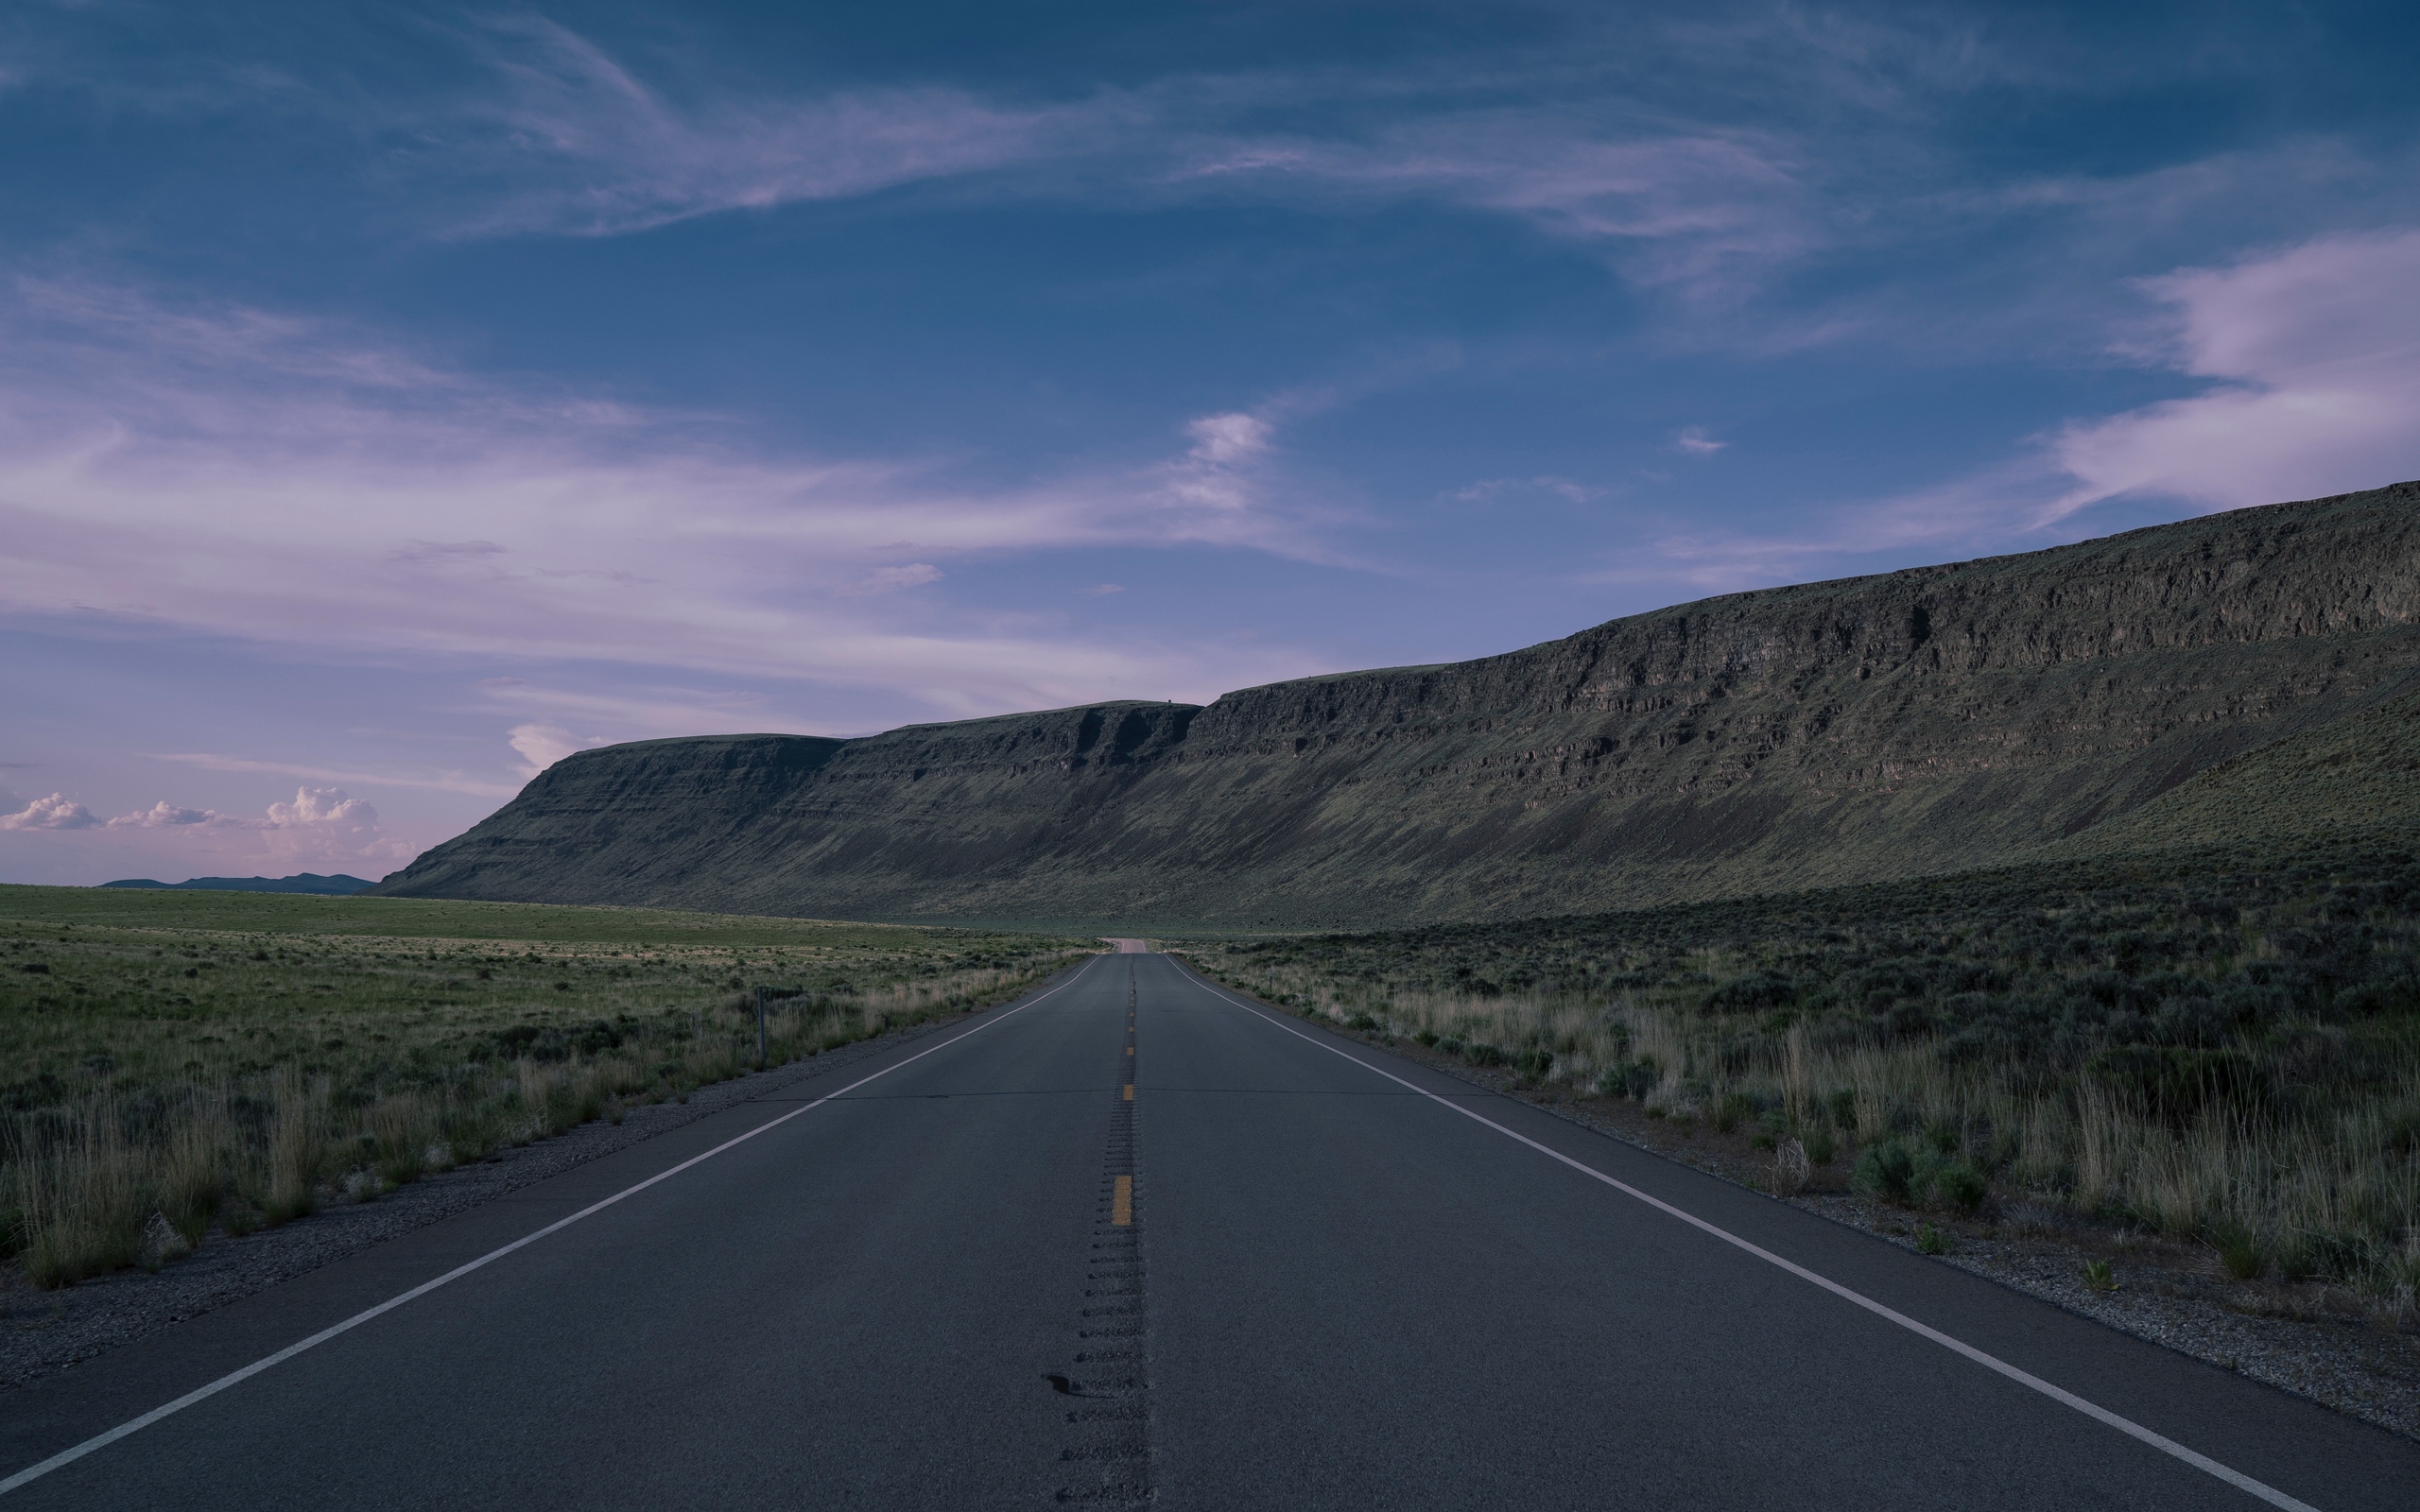 Download wallpaper 2560x1600 road, highway, mountains